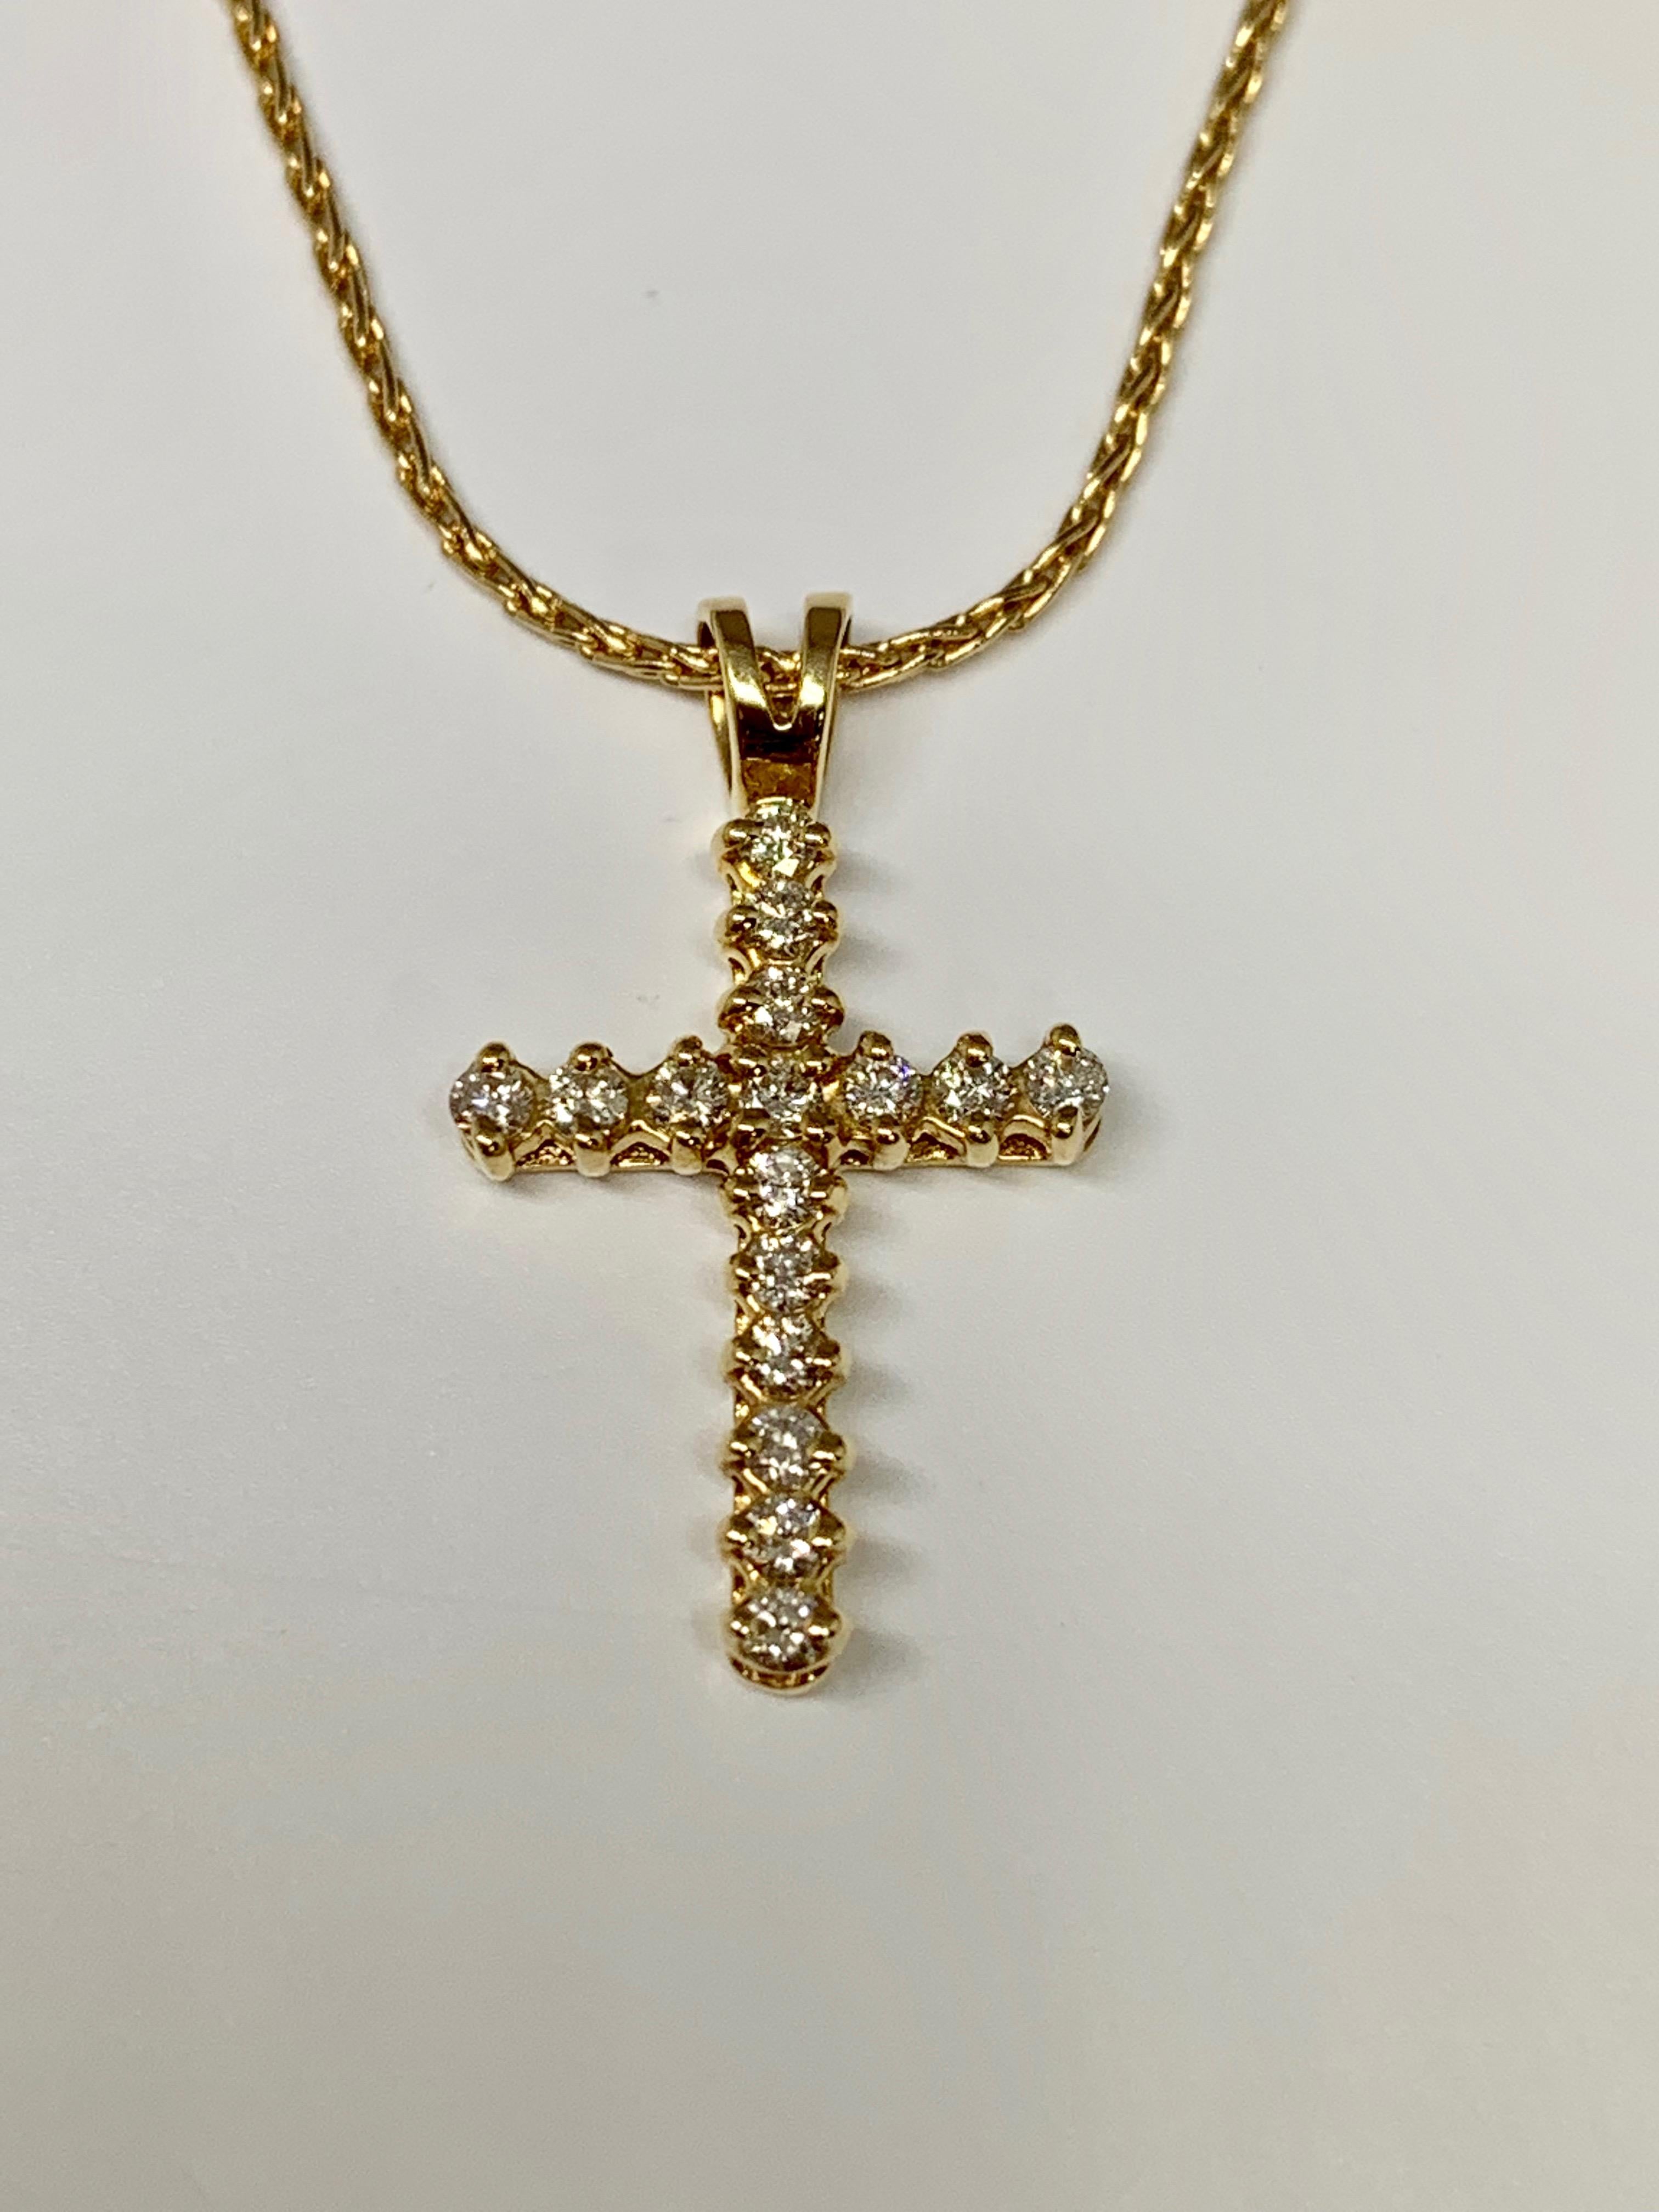 This classic cross pendant is made of 14K yellow gold and features 0.25 carats of round white diamonds. This necklace includes an 18 inch wheat style chain with a sturdy lobster claw clasp. 